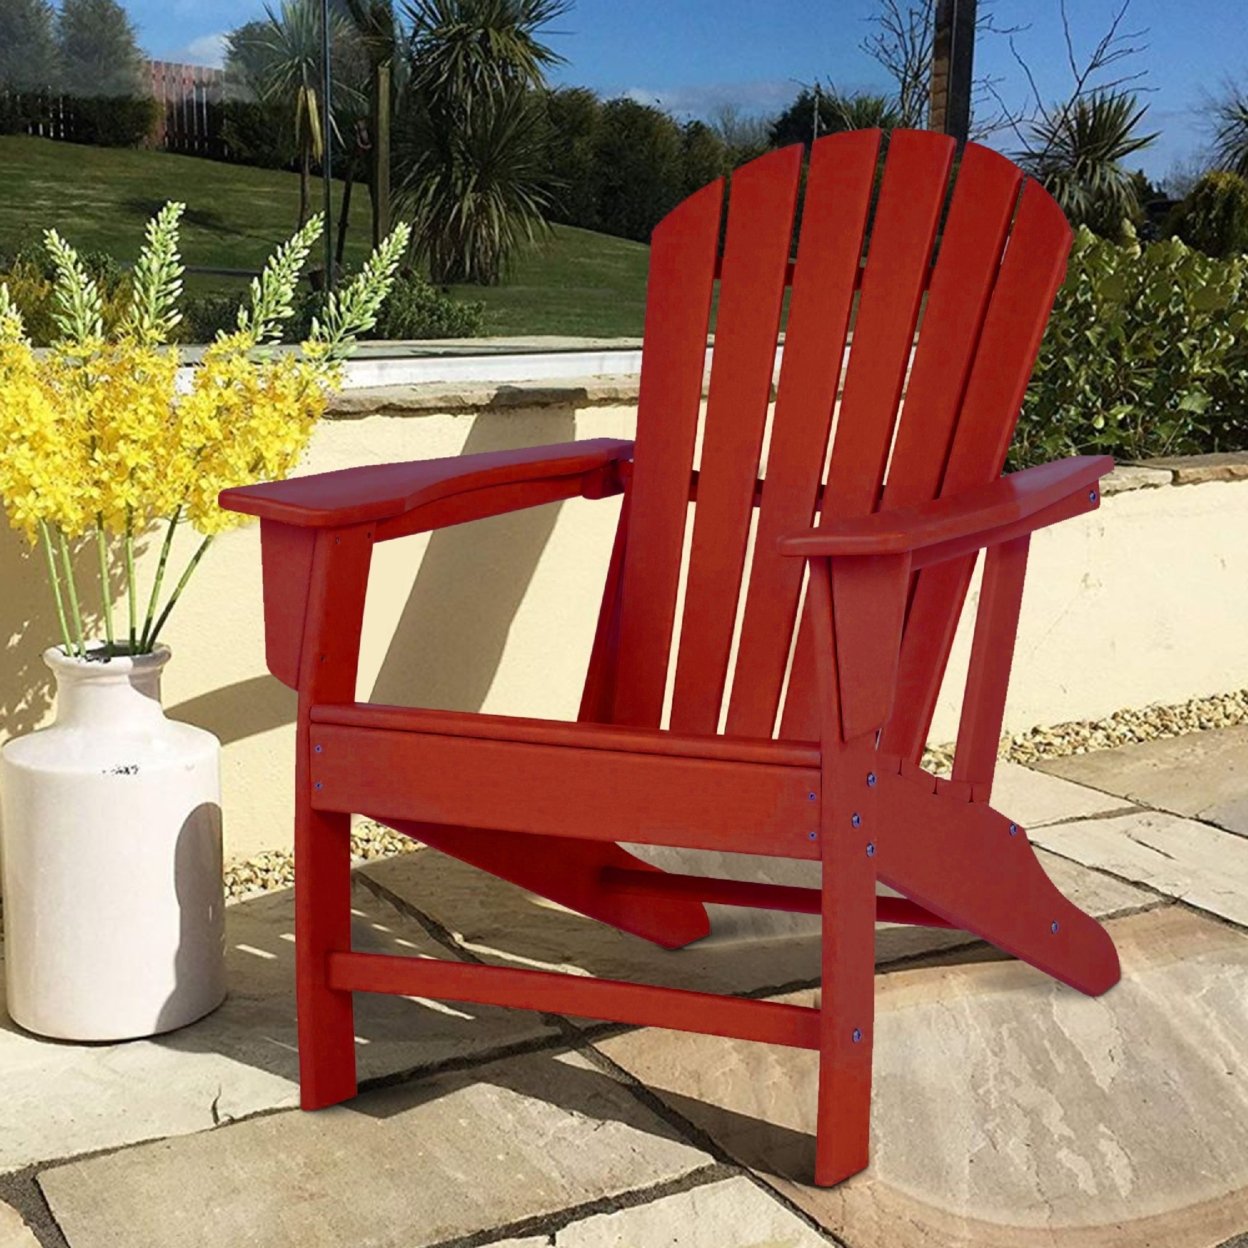 Contemporary Plastic Adirondack Chair With Slatted Back, Red- Saltoro Sherpi